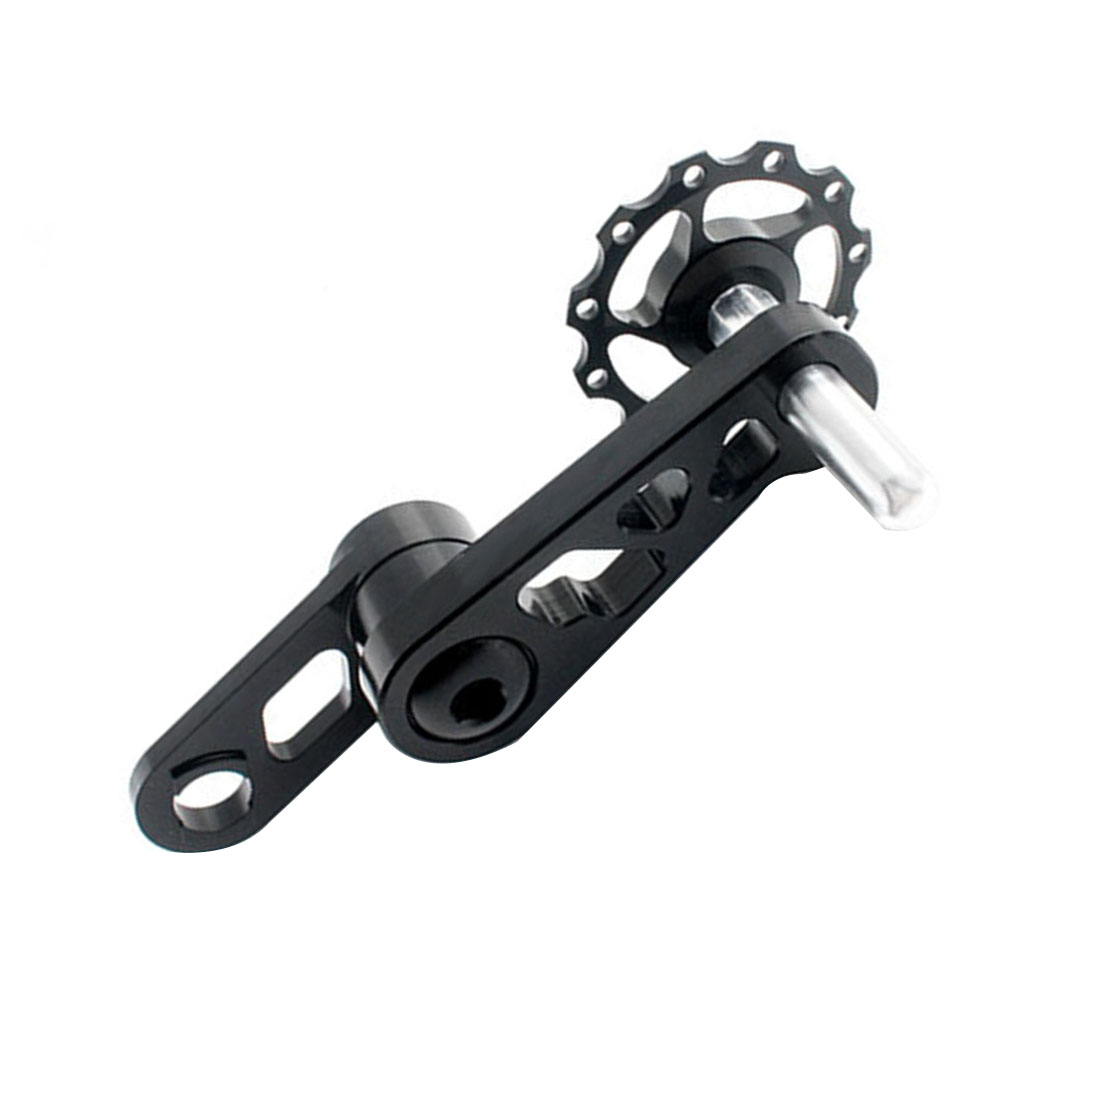 BGNING Folding Bike Chain Stabilizer Rear Derailleur Chains Guide Aluminum Alloy Bicycle Modified Spare Parts